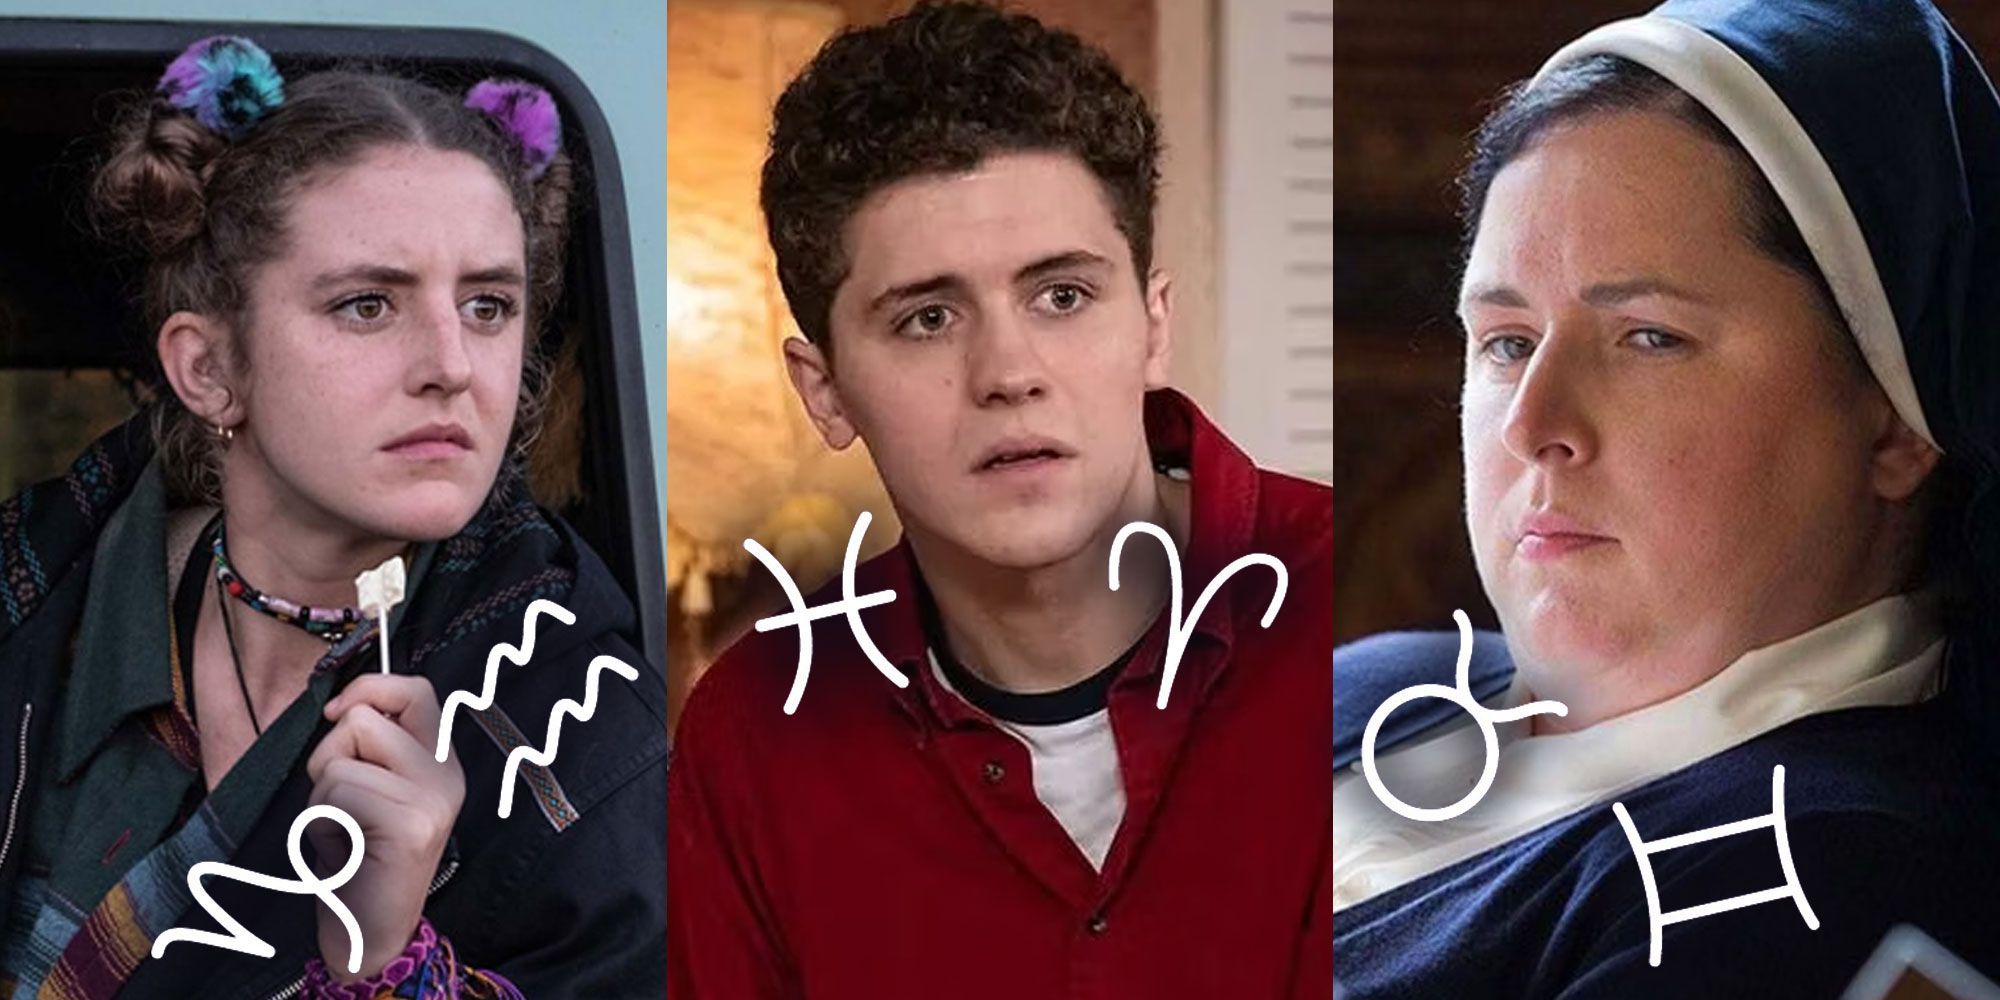 A split image features Derry Girls characters Orla, James, and Sister Michael with zodiac symbols along the bottom